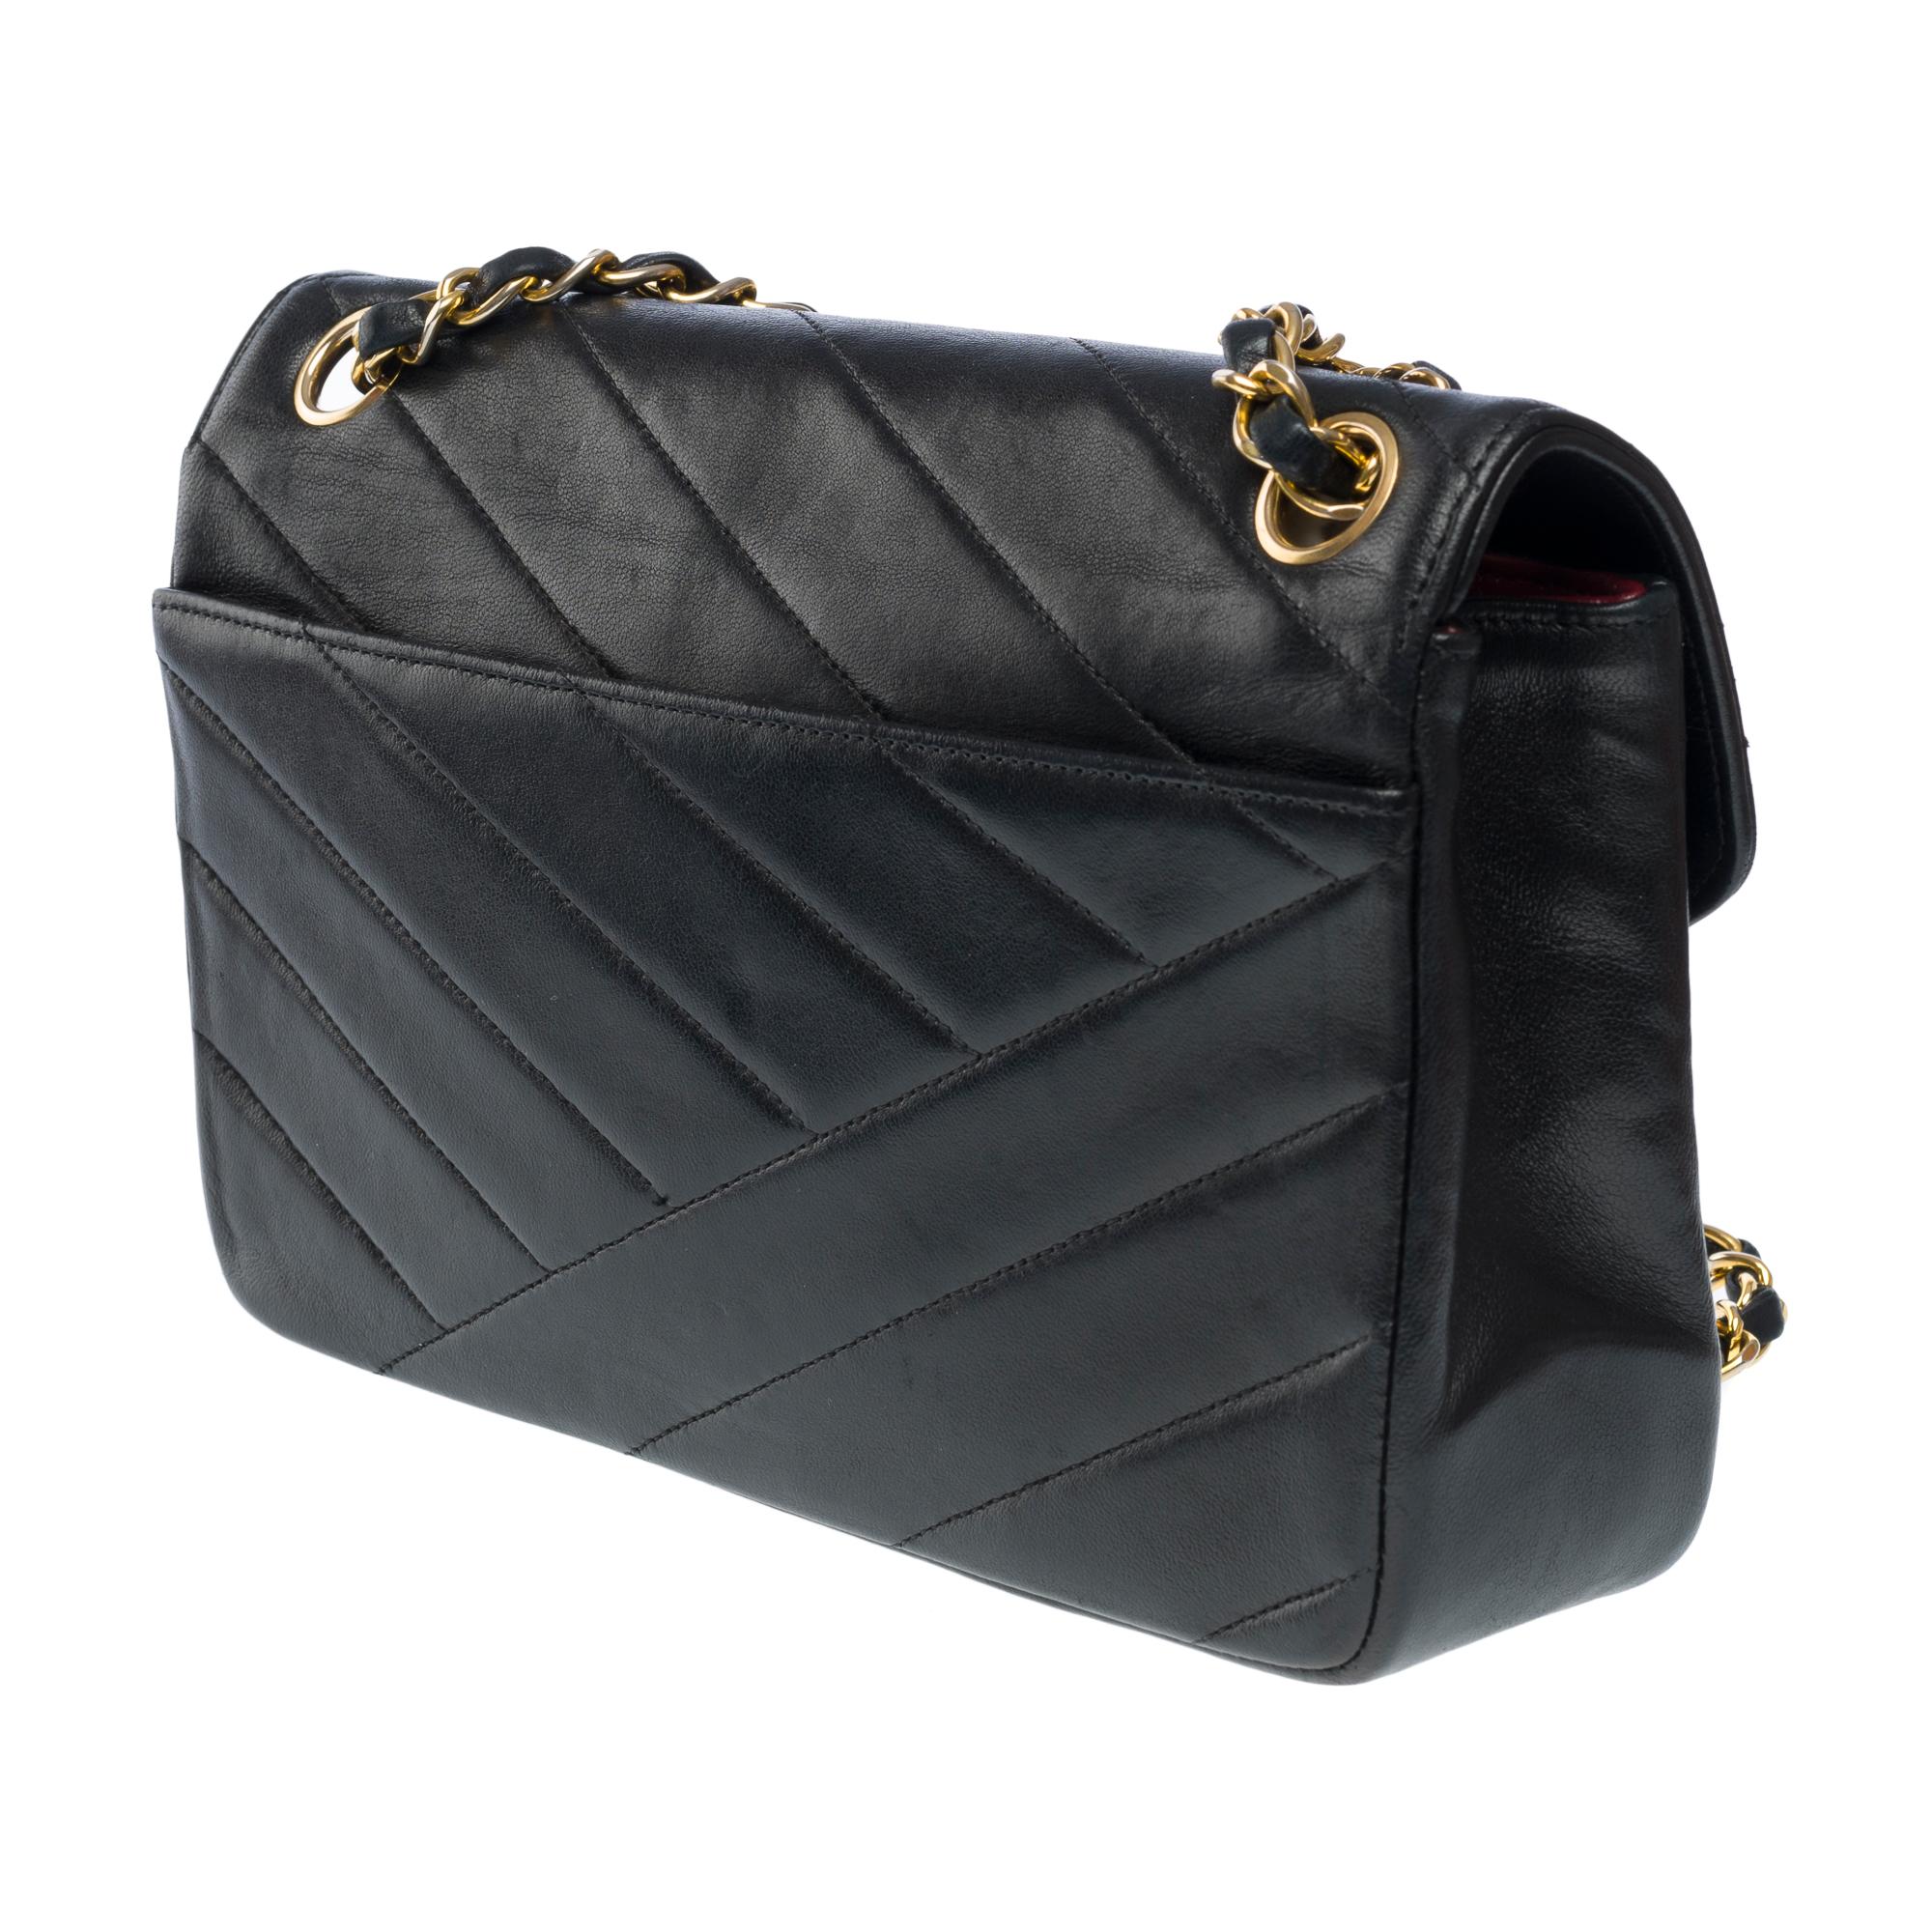 Chanel Classic shoulder flap bag in black herringbone quilted lamb leather, GHW 2